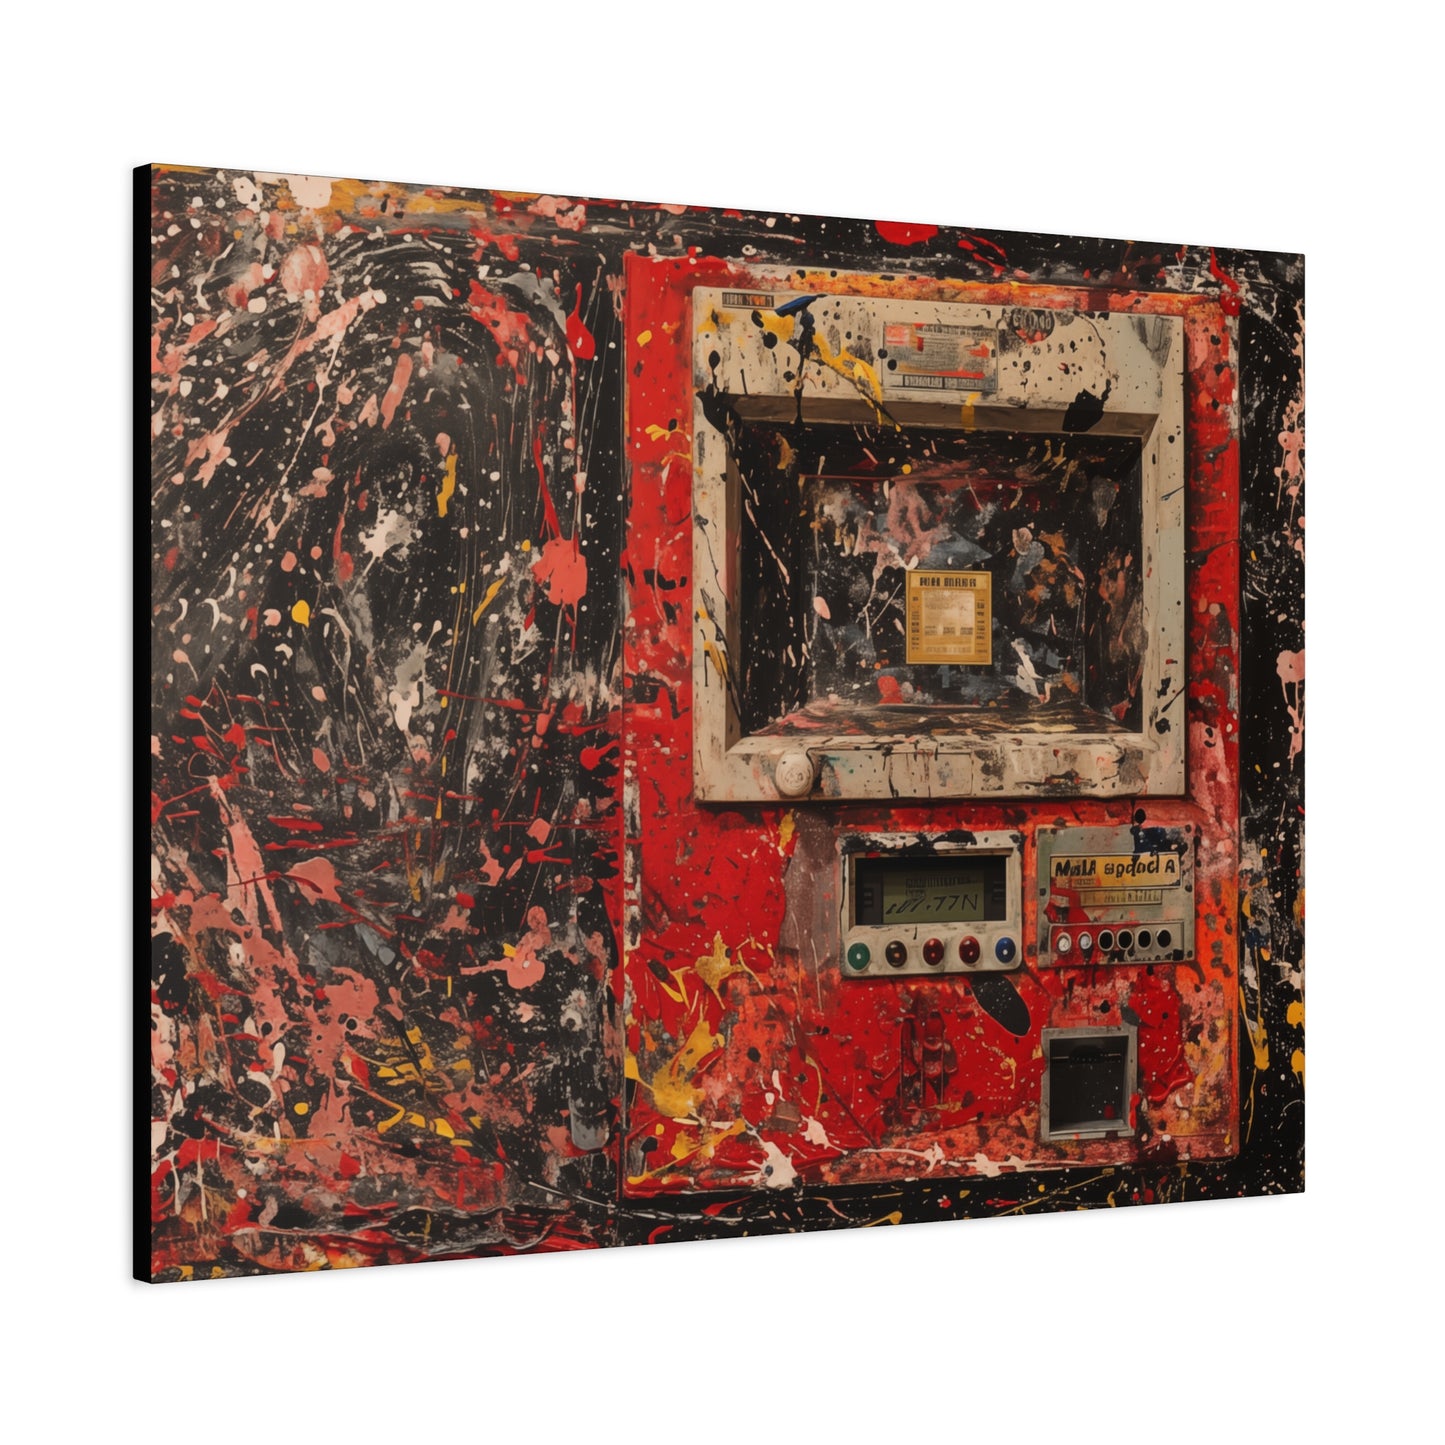 Pollock paints and ATM - the canvas